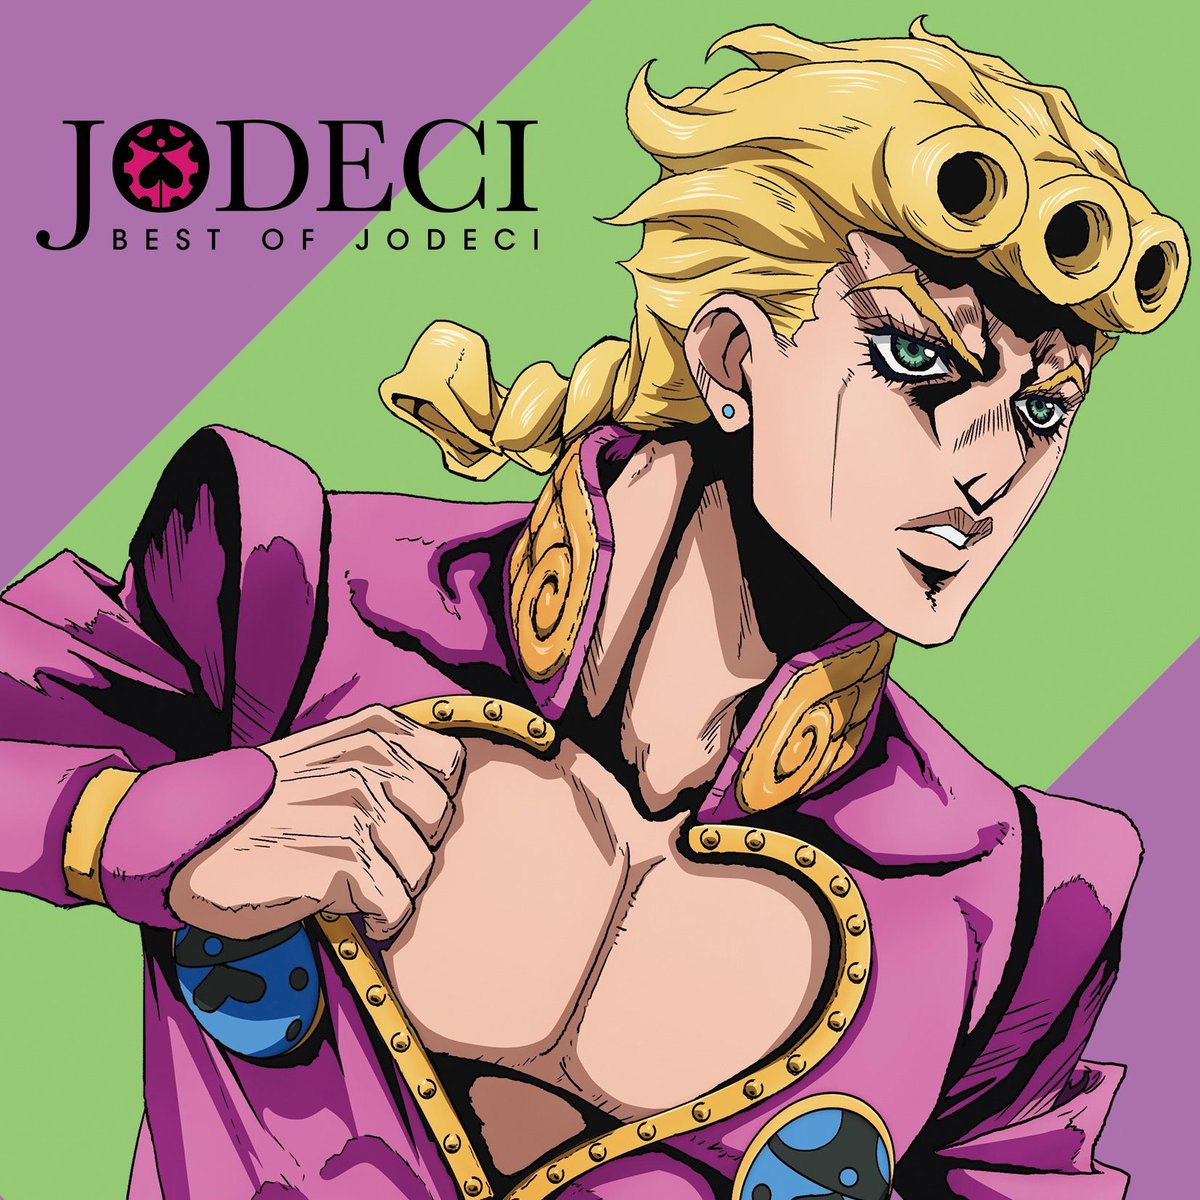 If you had to create a JoJo stand from any band or song, which